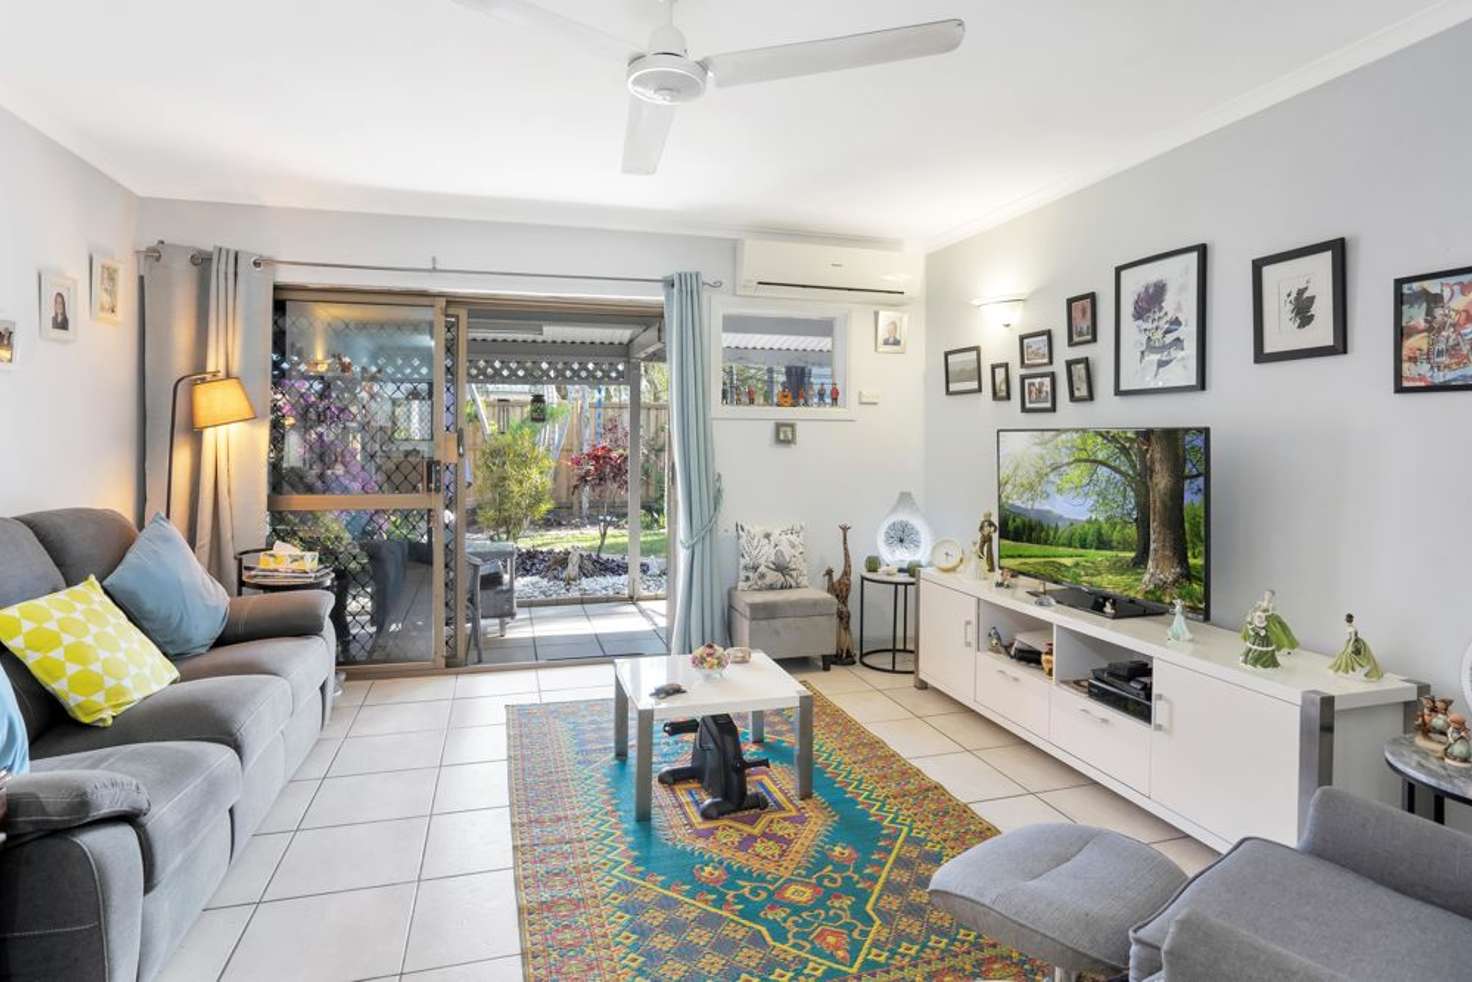 Main view of Homely unit listing, 14/2-8 Winkworth Street, Bungalow QLD 4870